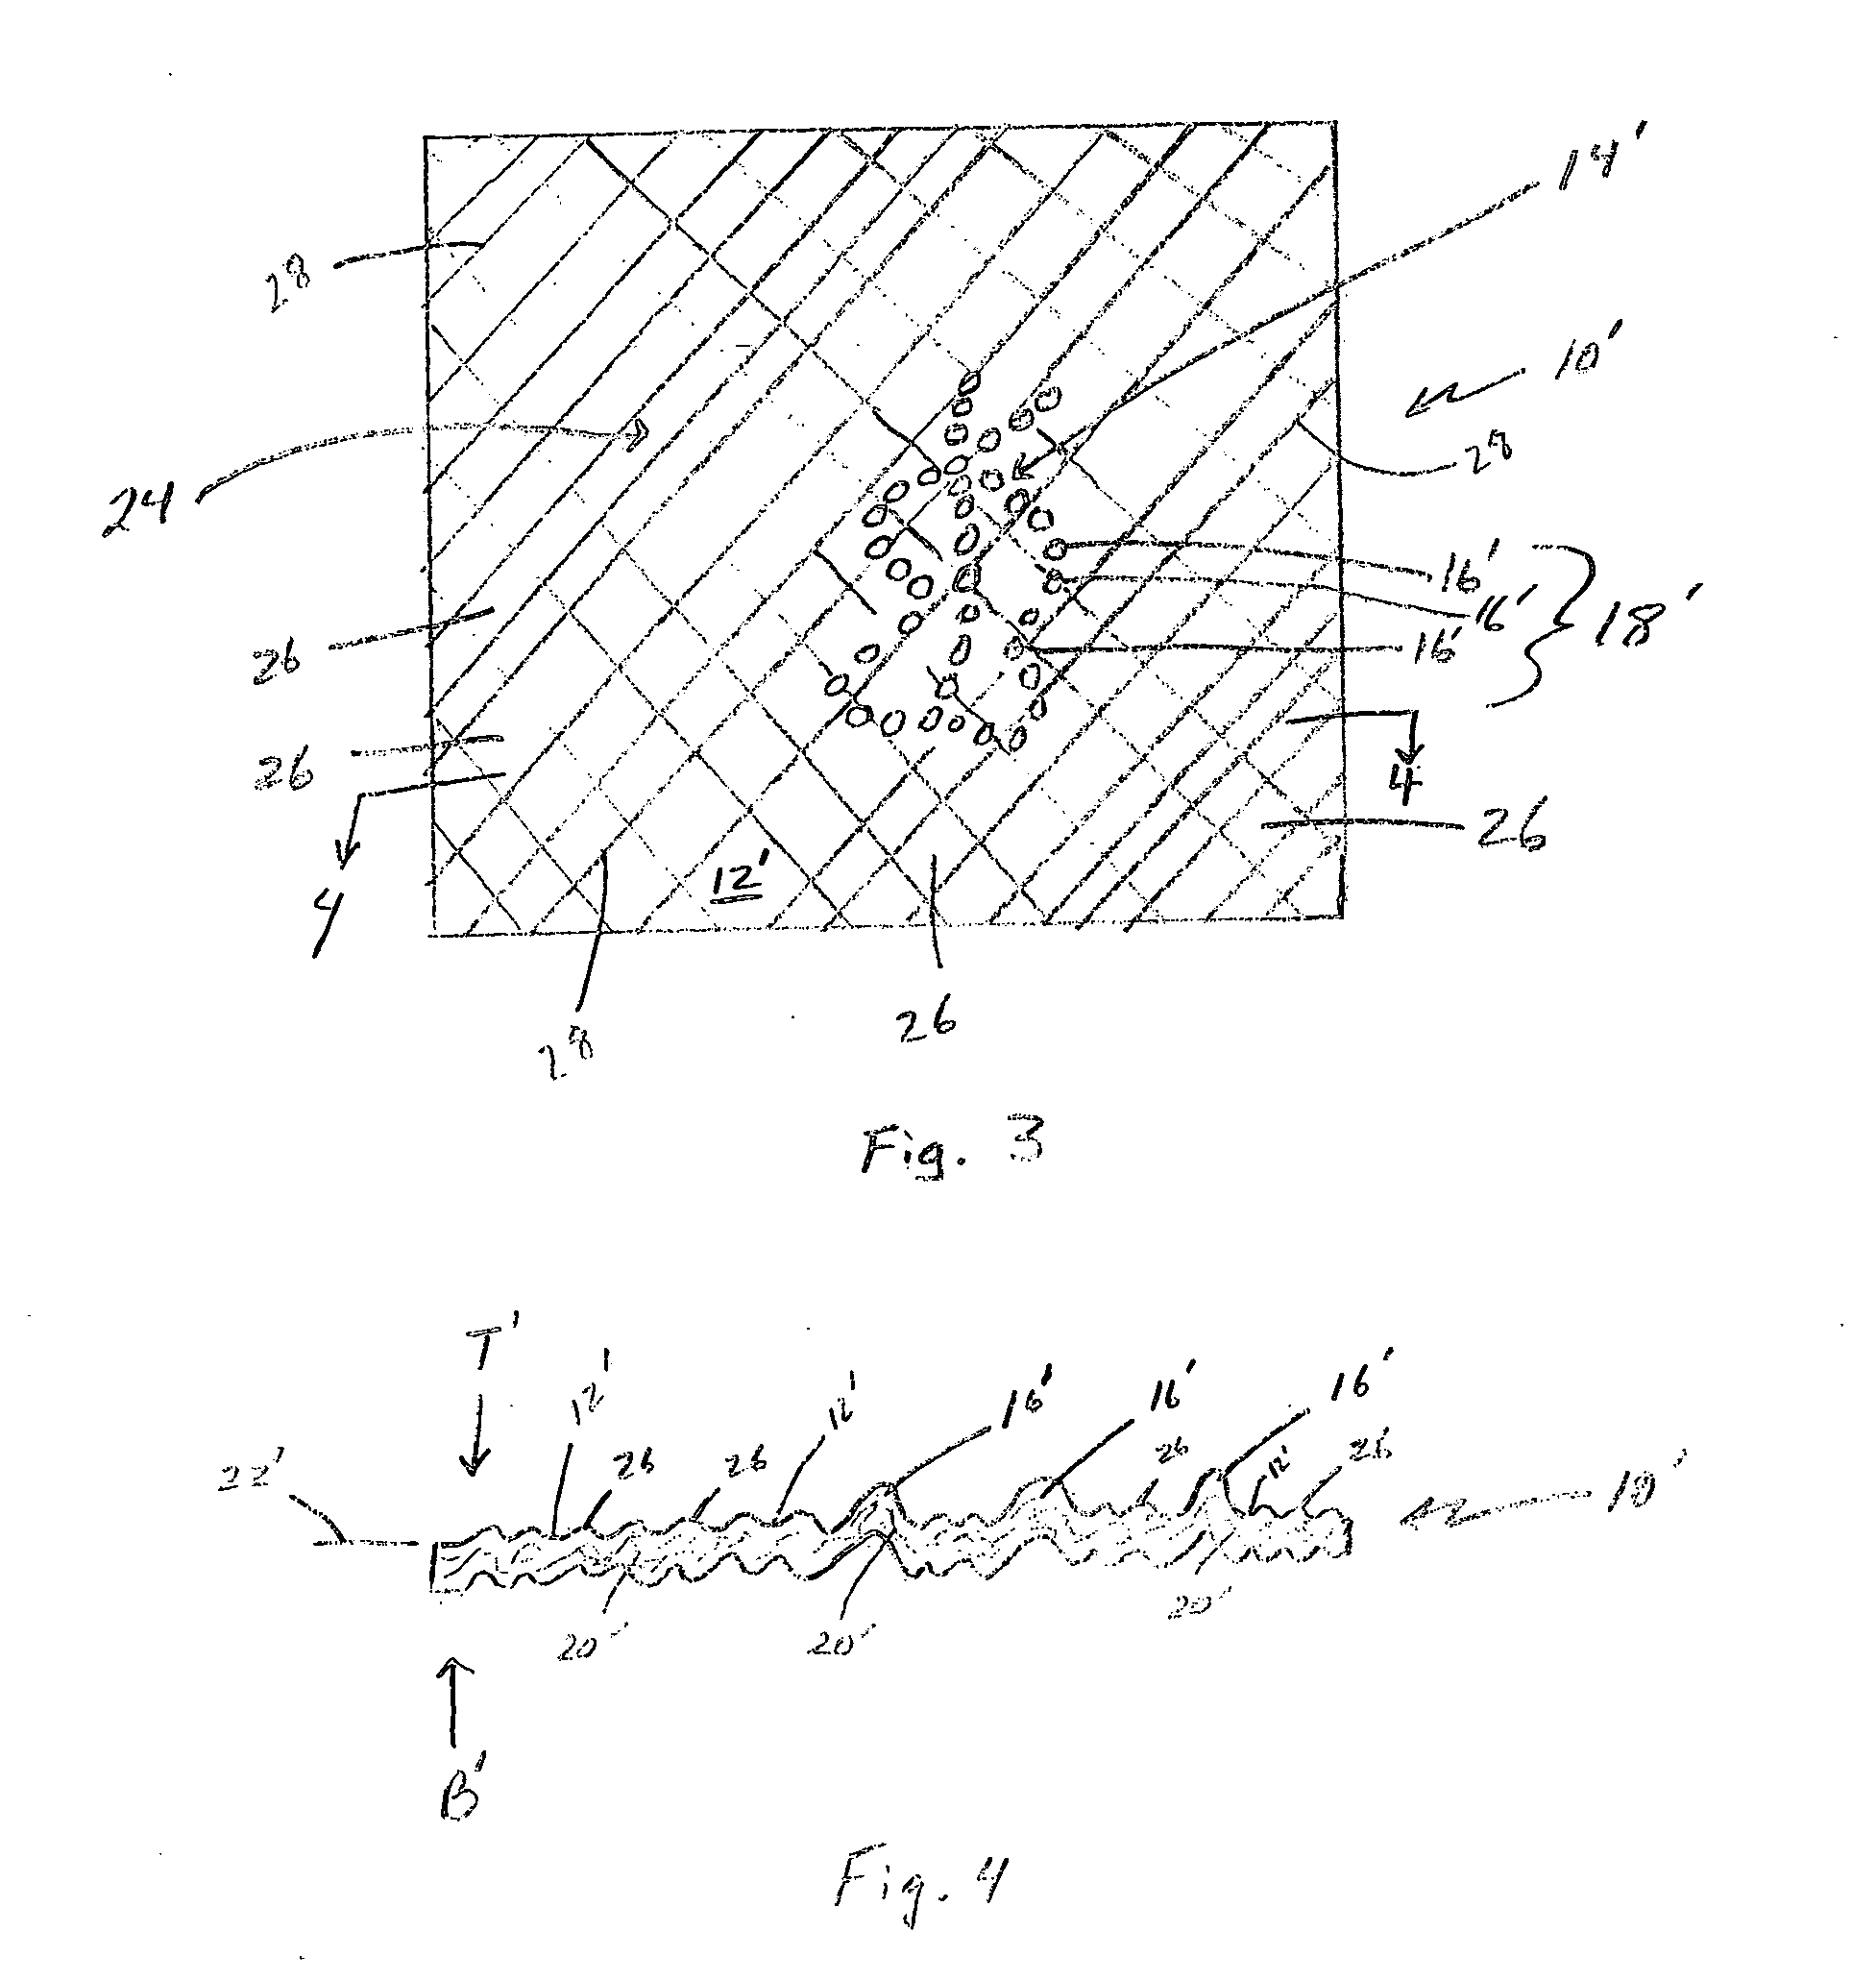 Fibrous structures comprising a design and processes for making same